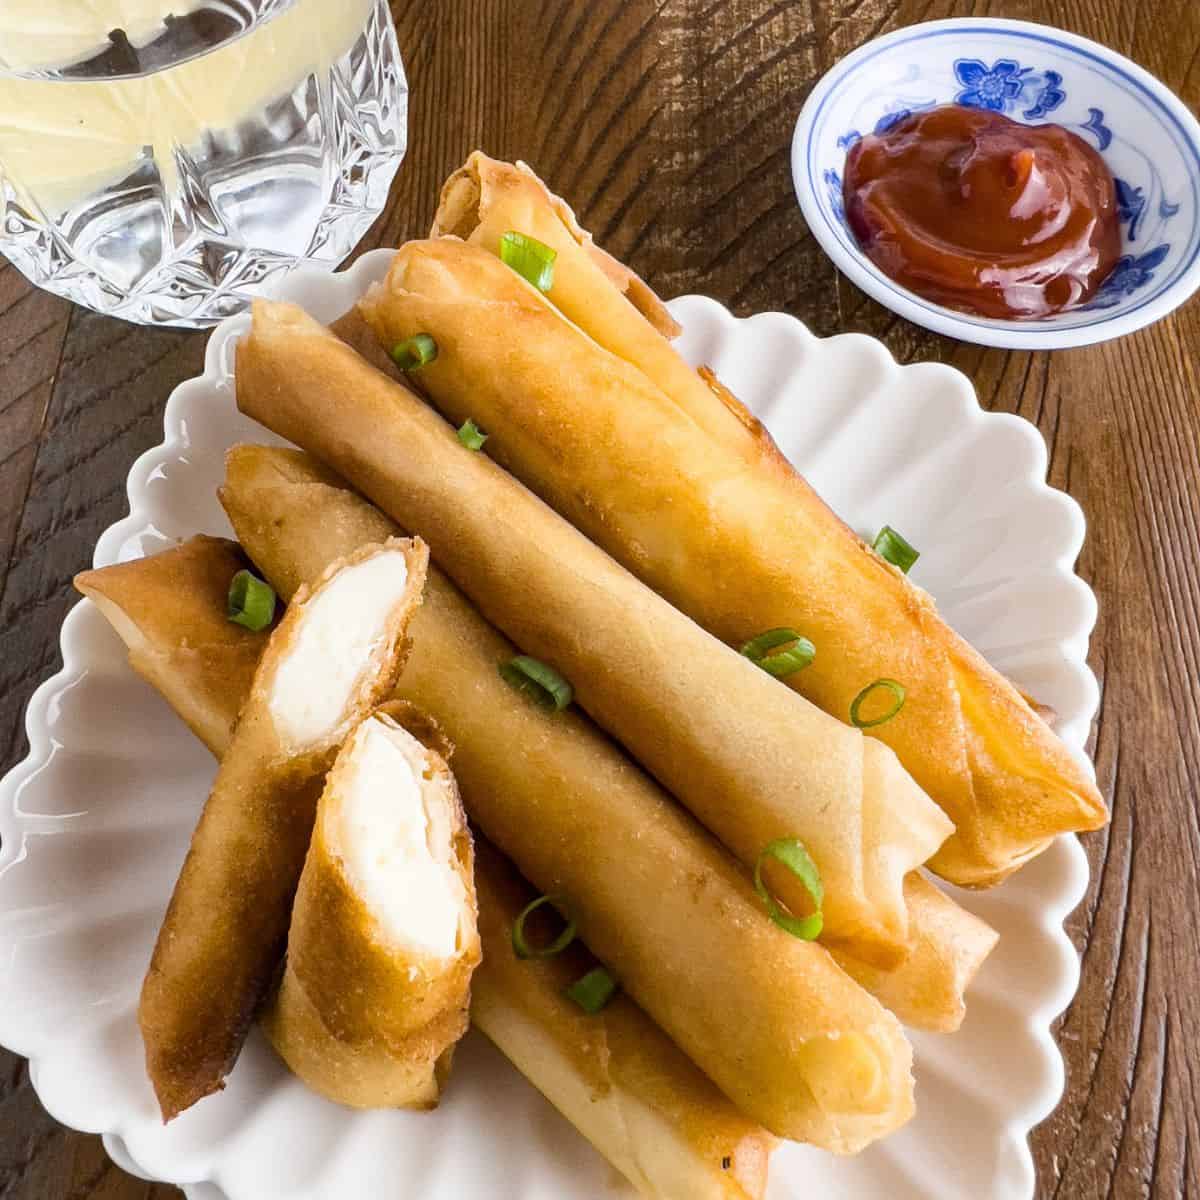 Finish dish of cheese lumpia on the table with dipping.